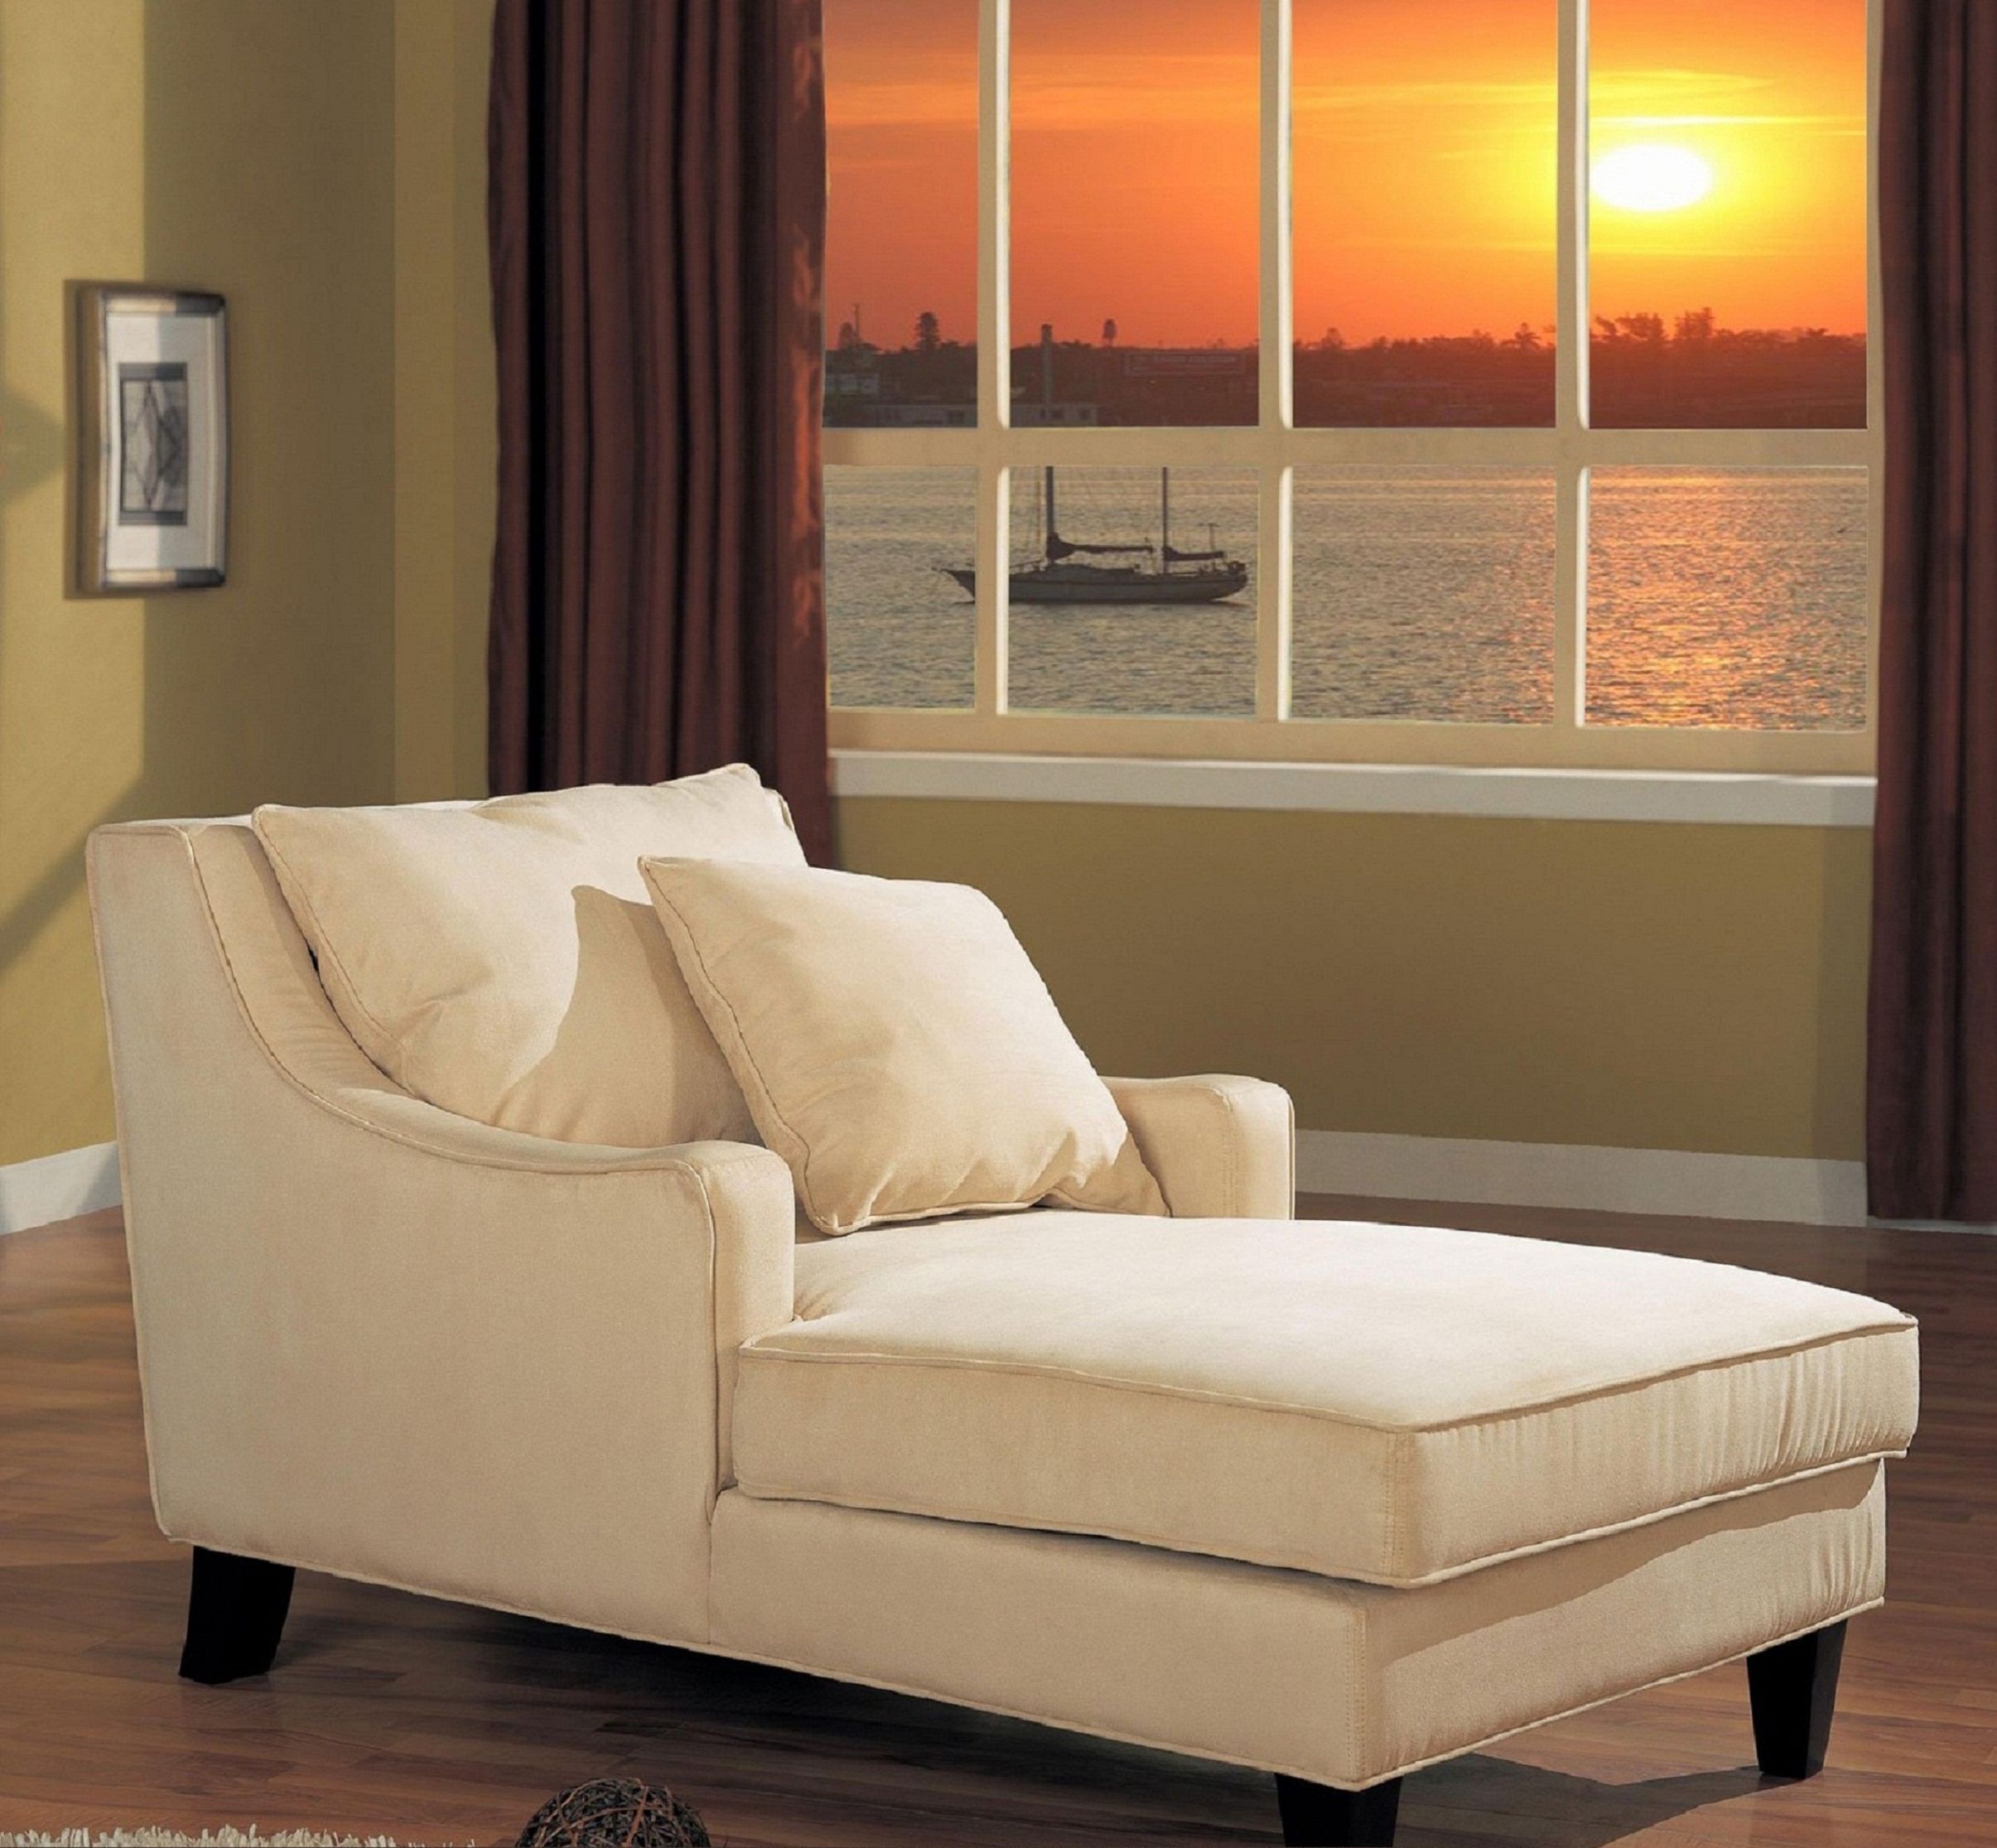 Upholstered Chaise Lounge Chairs Throughout Trendy Wide Beige Upholstered Chaise Lounge With Arm And Cushion Having (View 13 of 15)